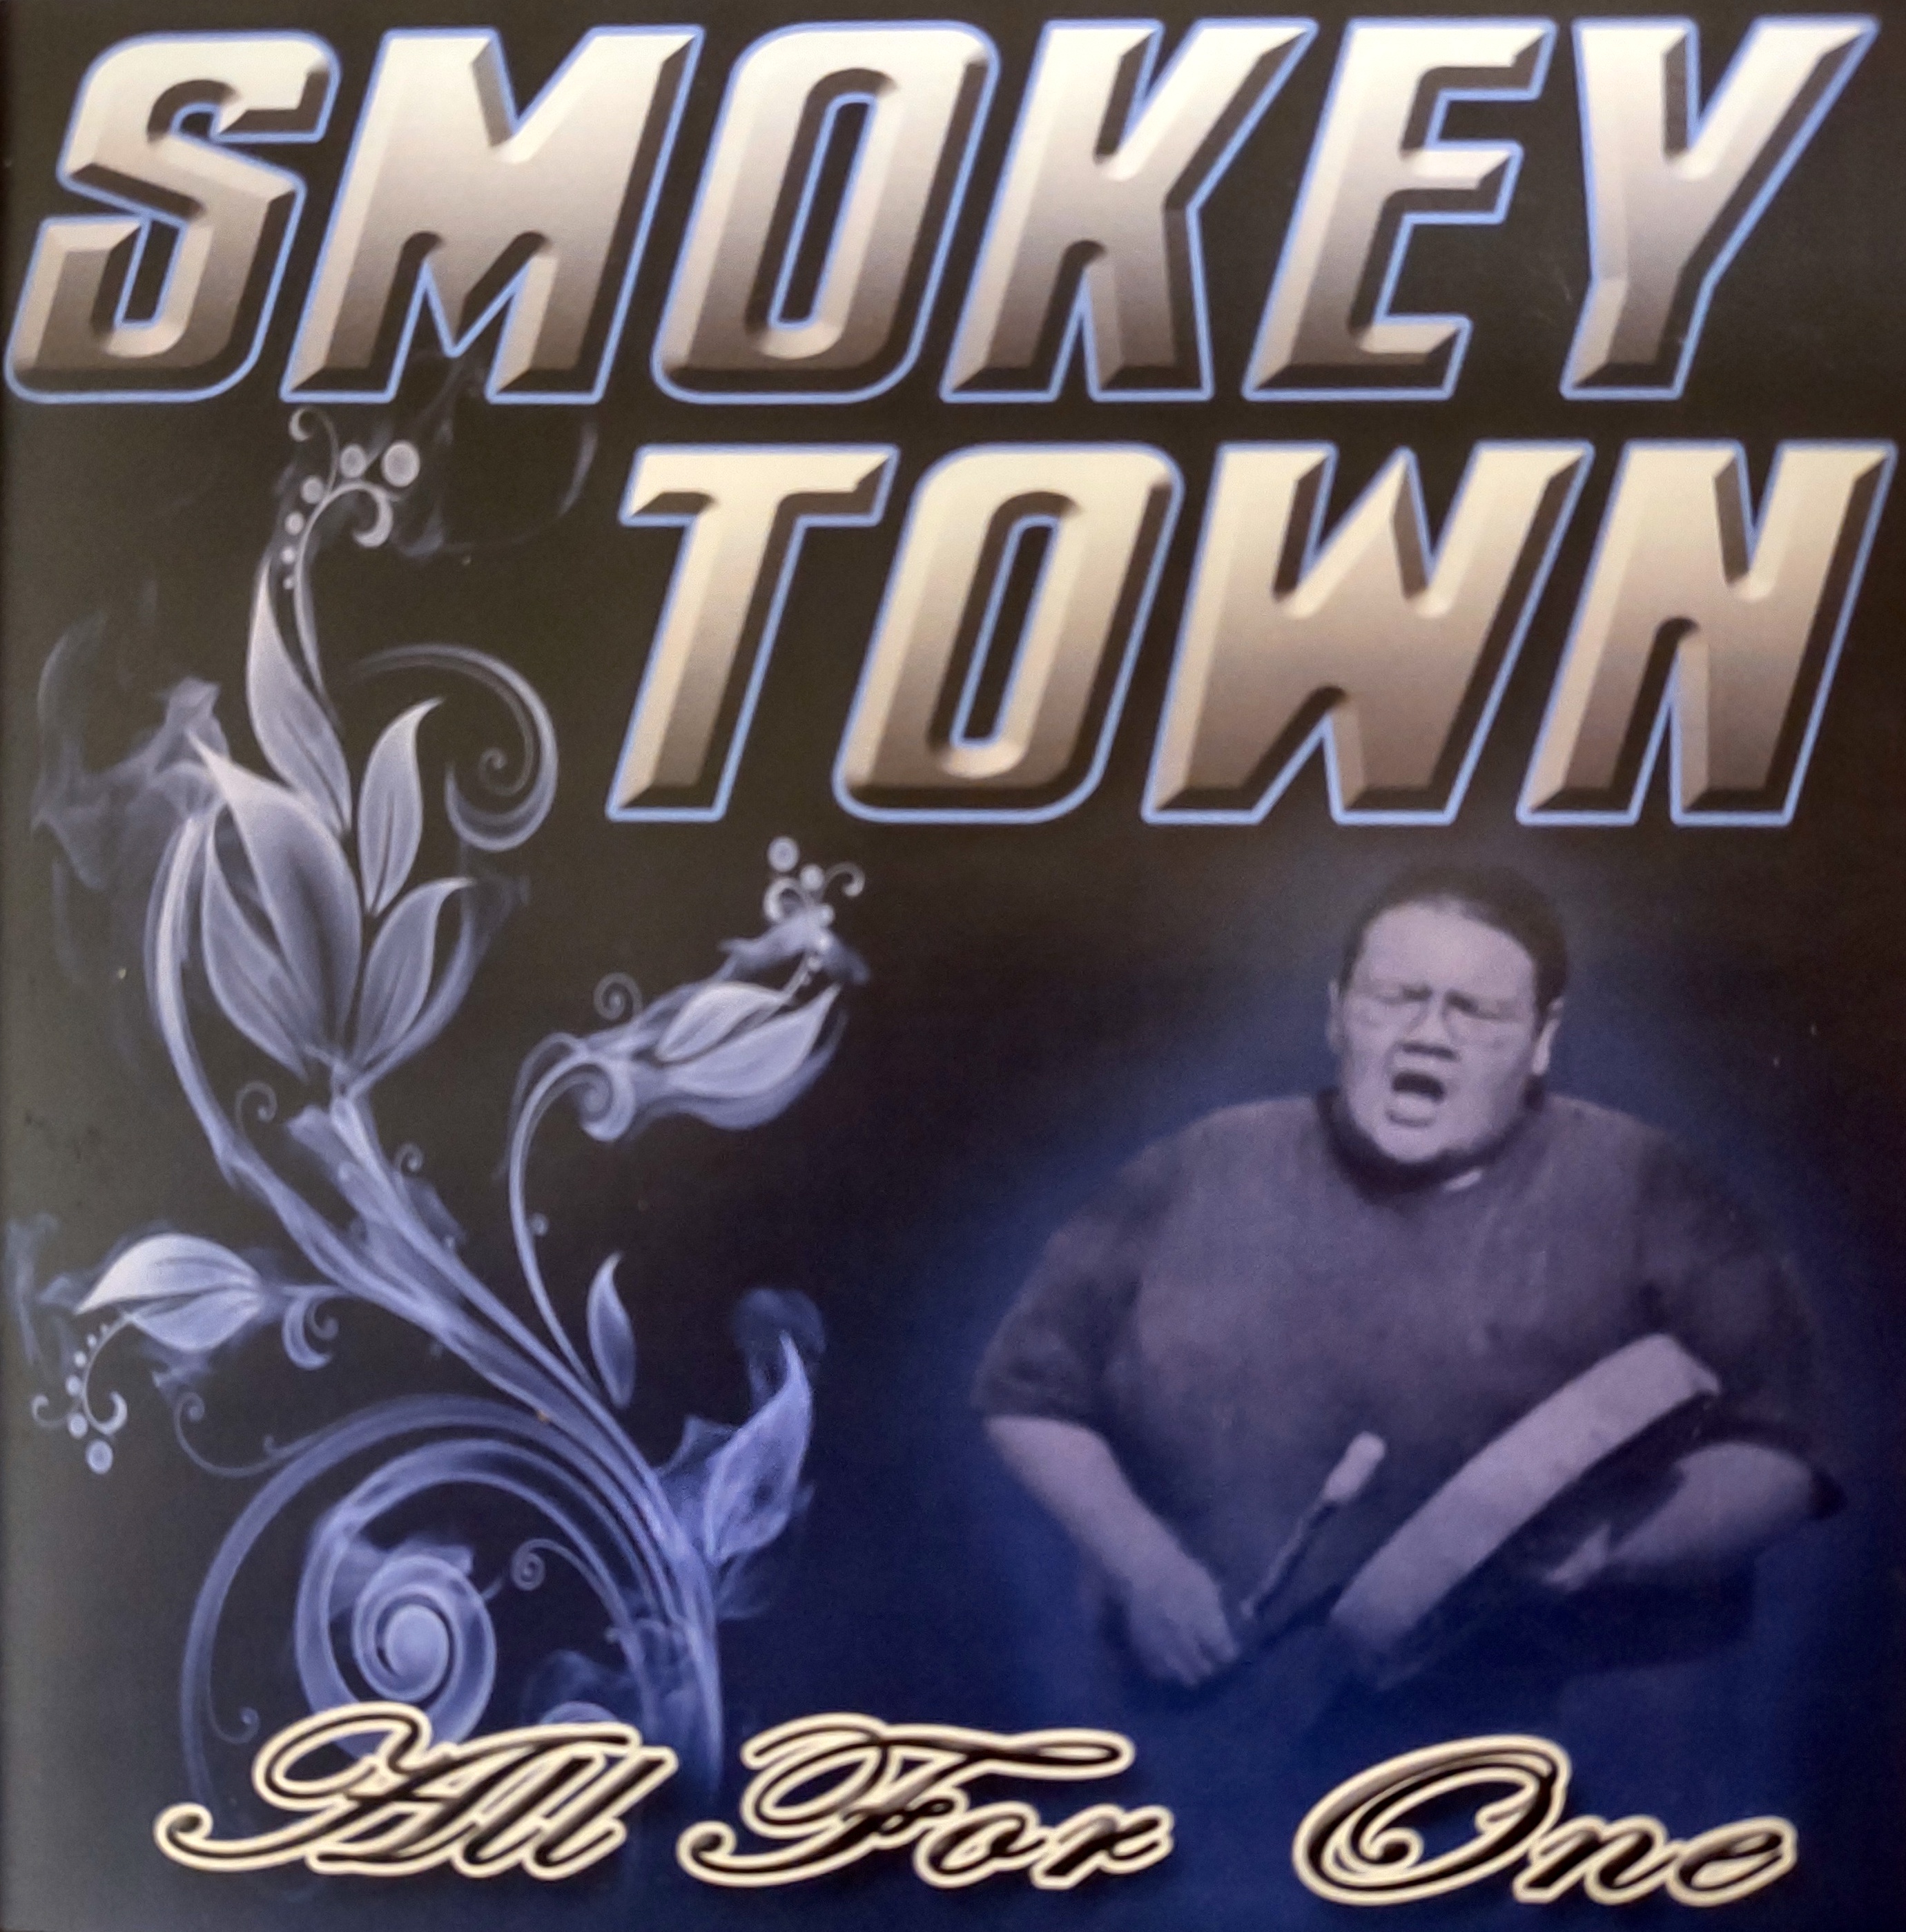 Art for S'good by Smokey Town